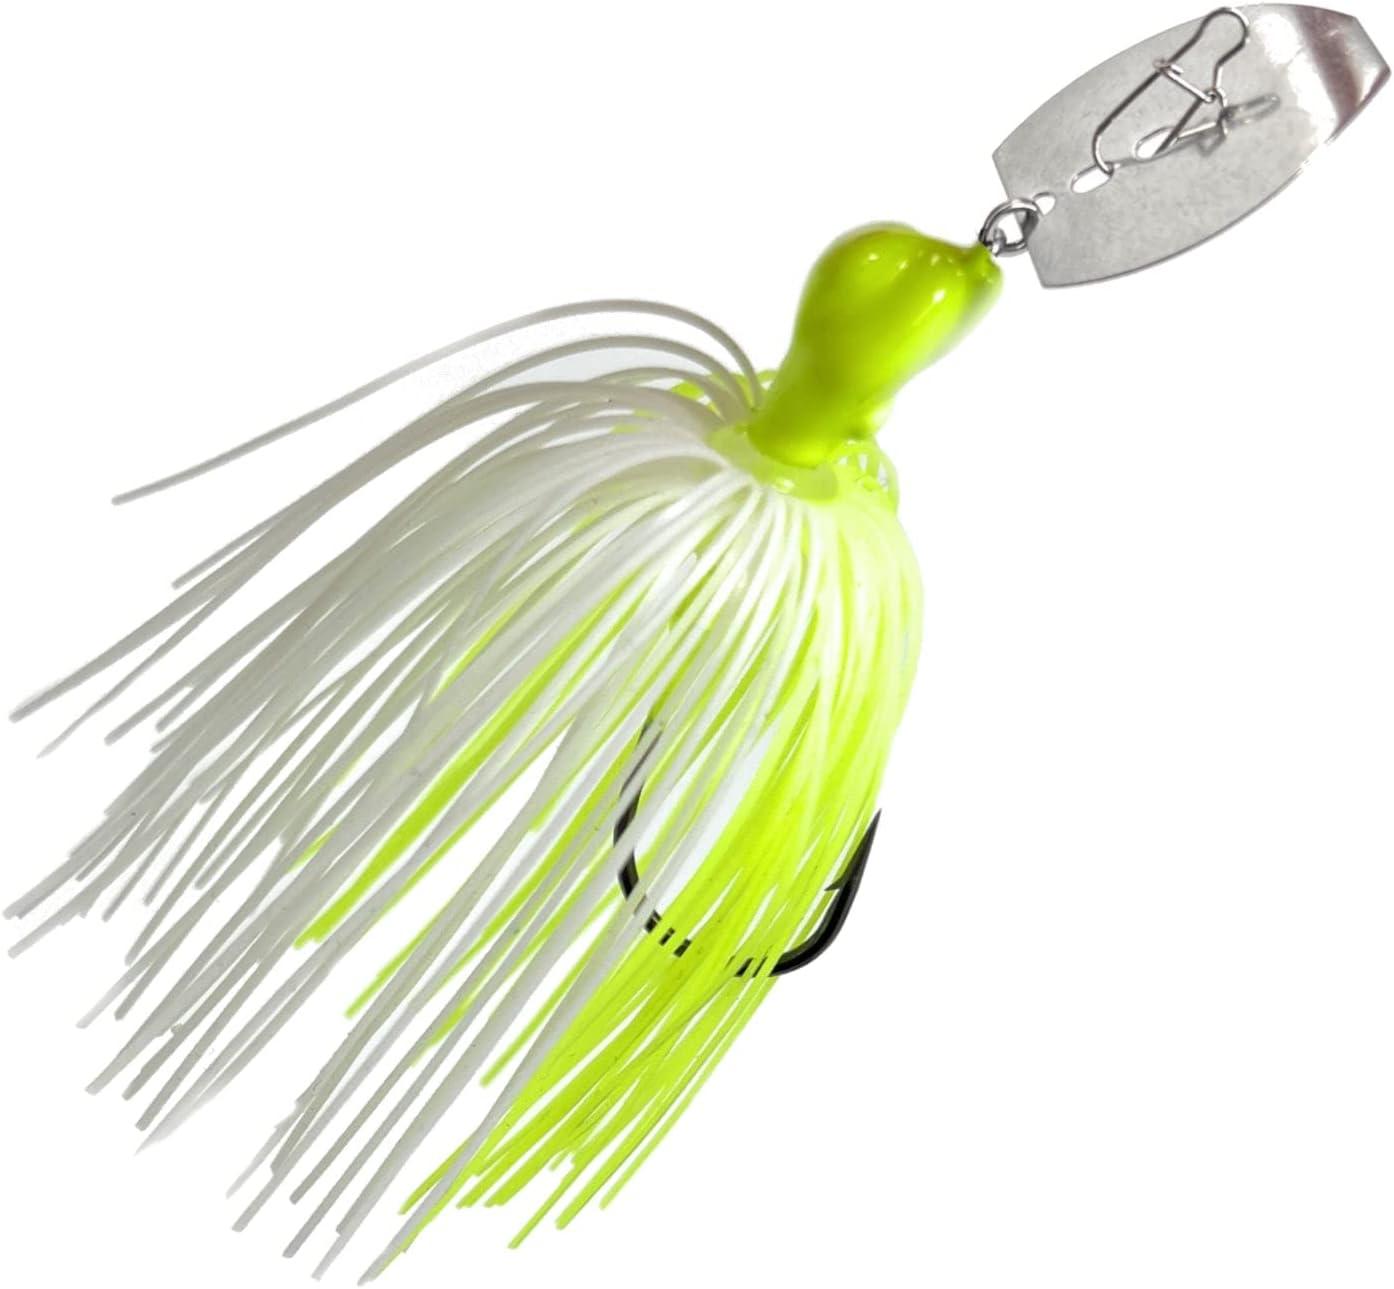 Reaction Tackle Tungsten Breaker Blade Jig Heads for Fishing - 2